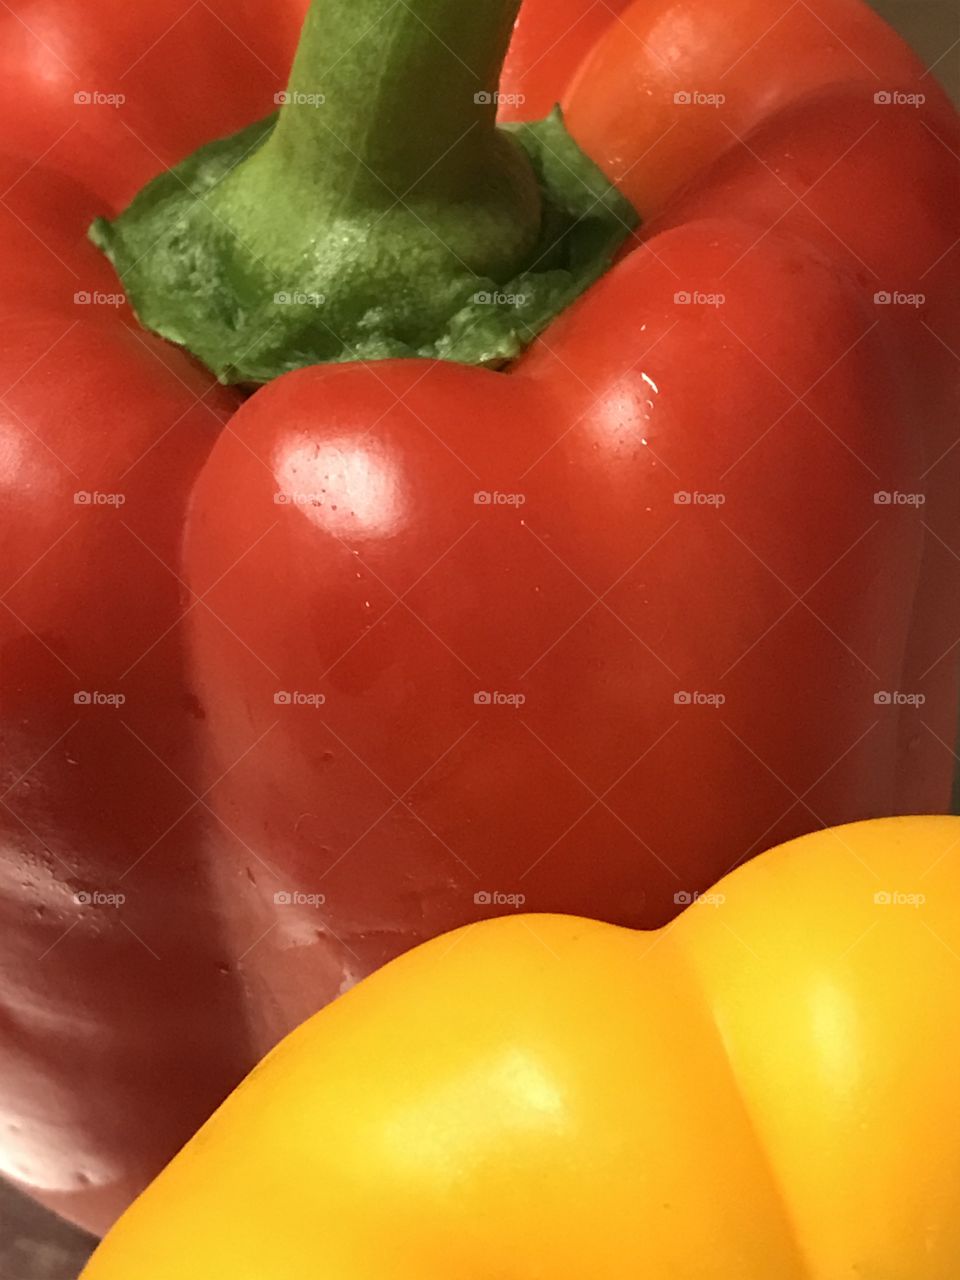 Colorful healthy fresh peppers